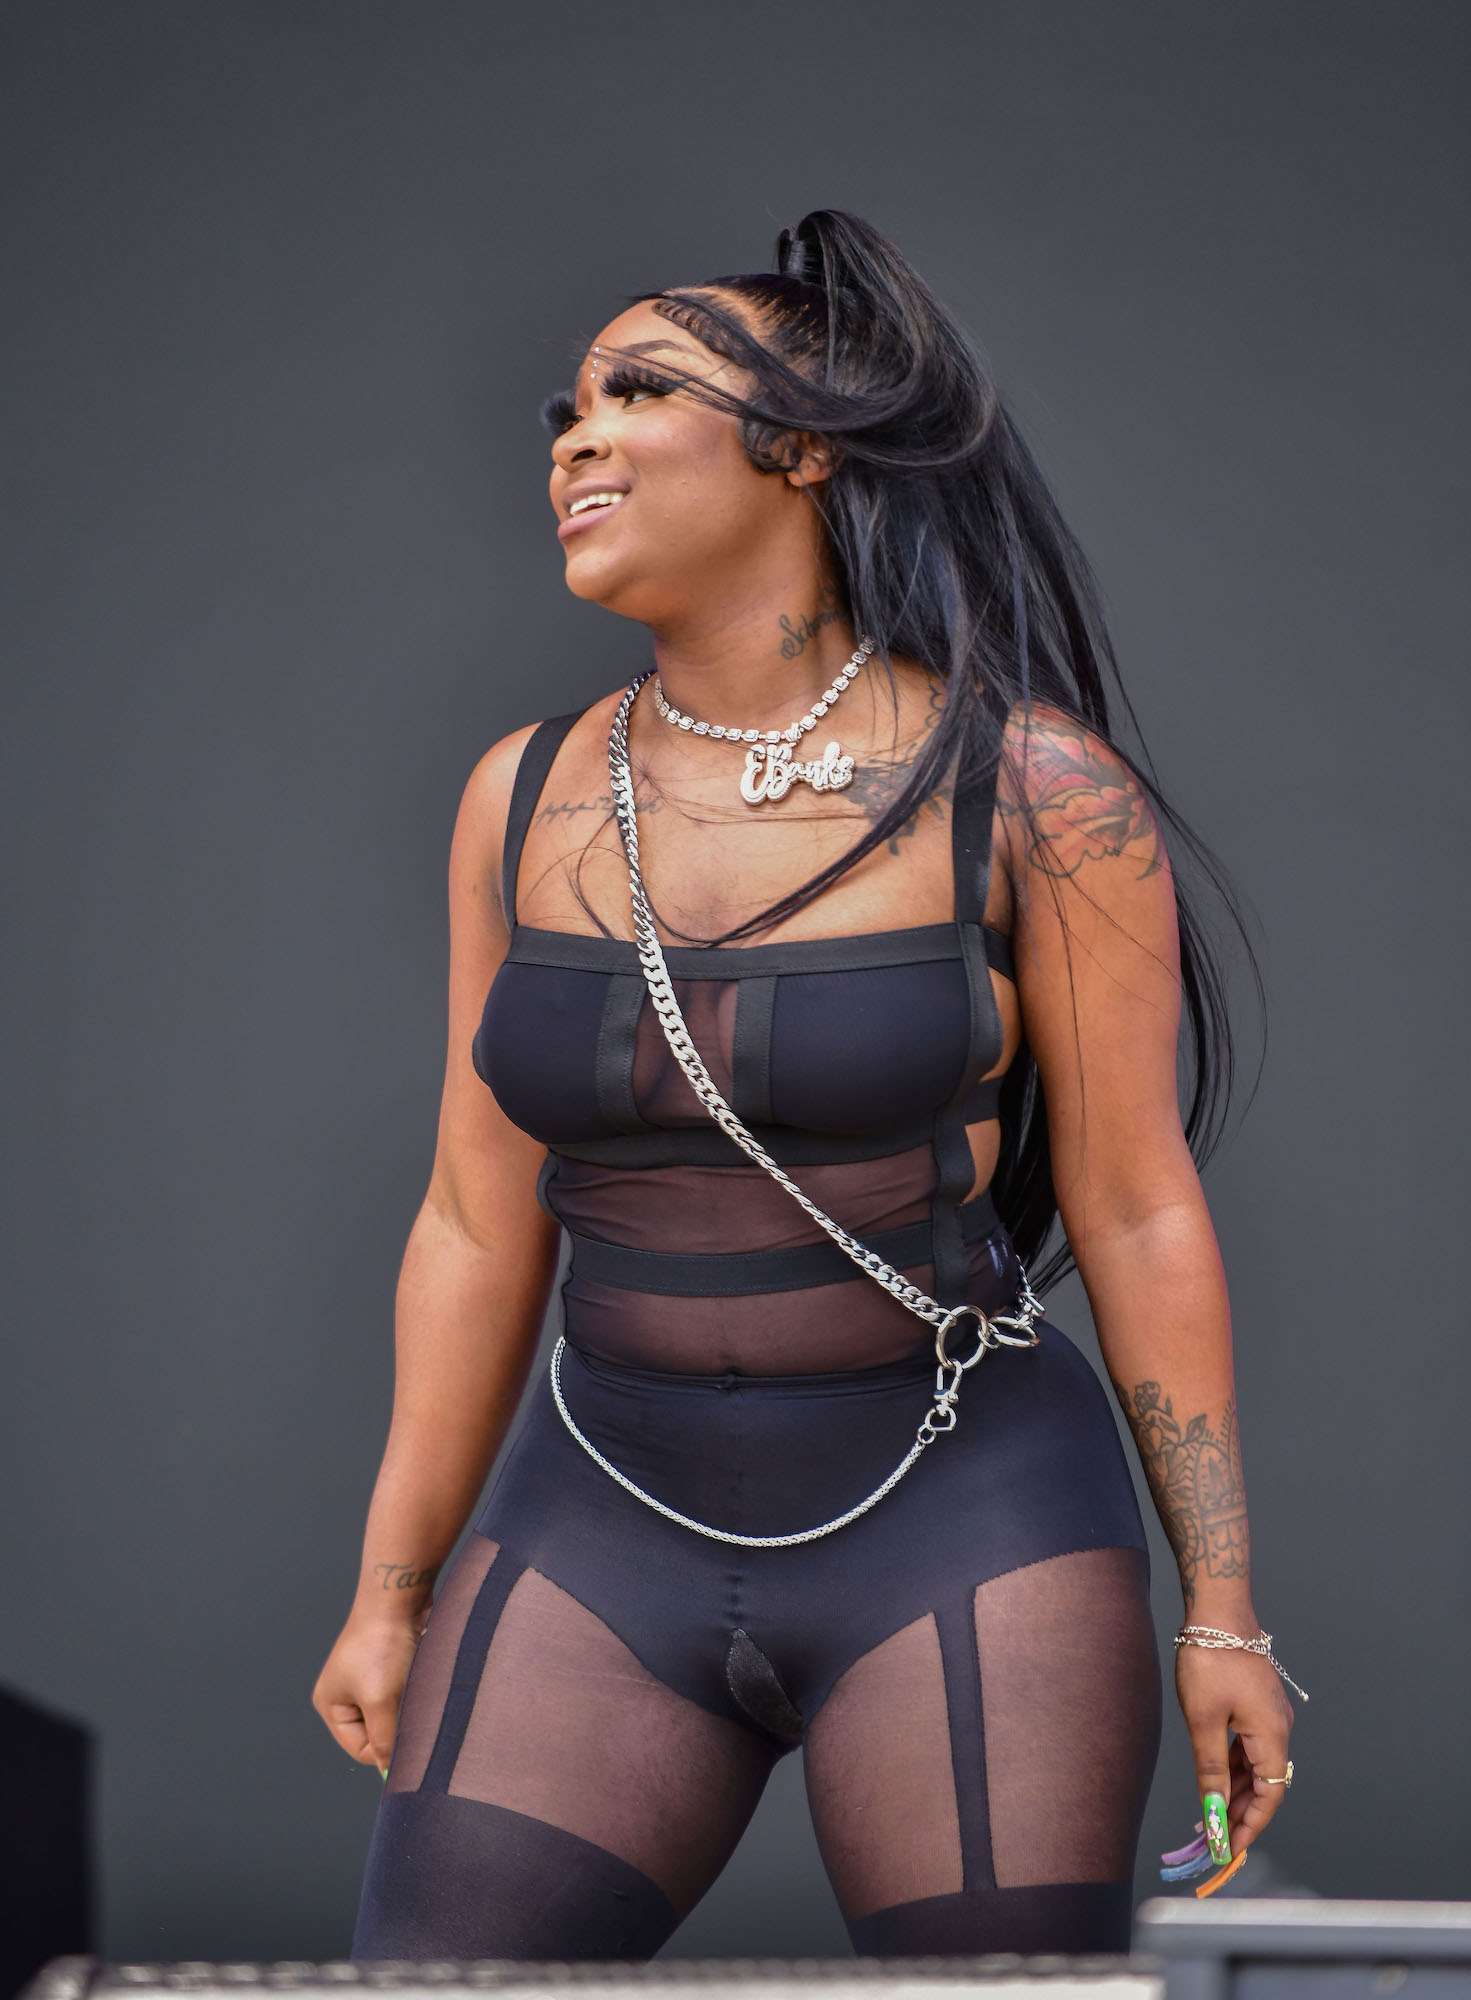 Erica Banks Live at Lollapalooza [GALLERY] 4